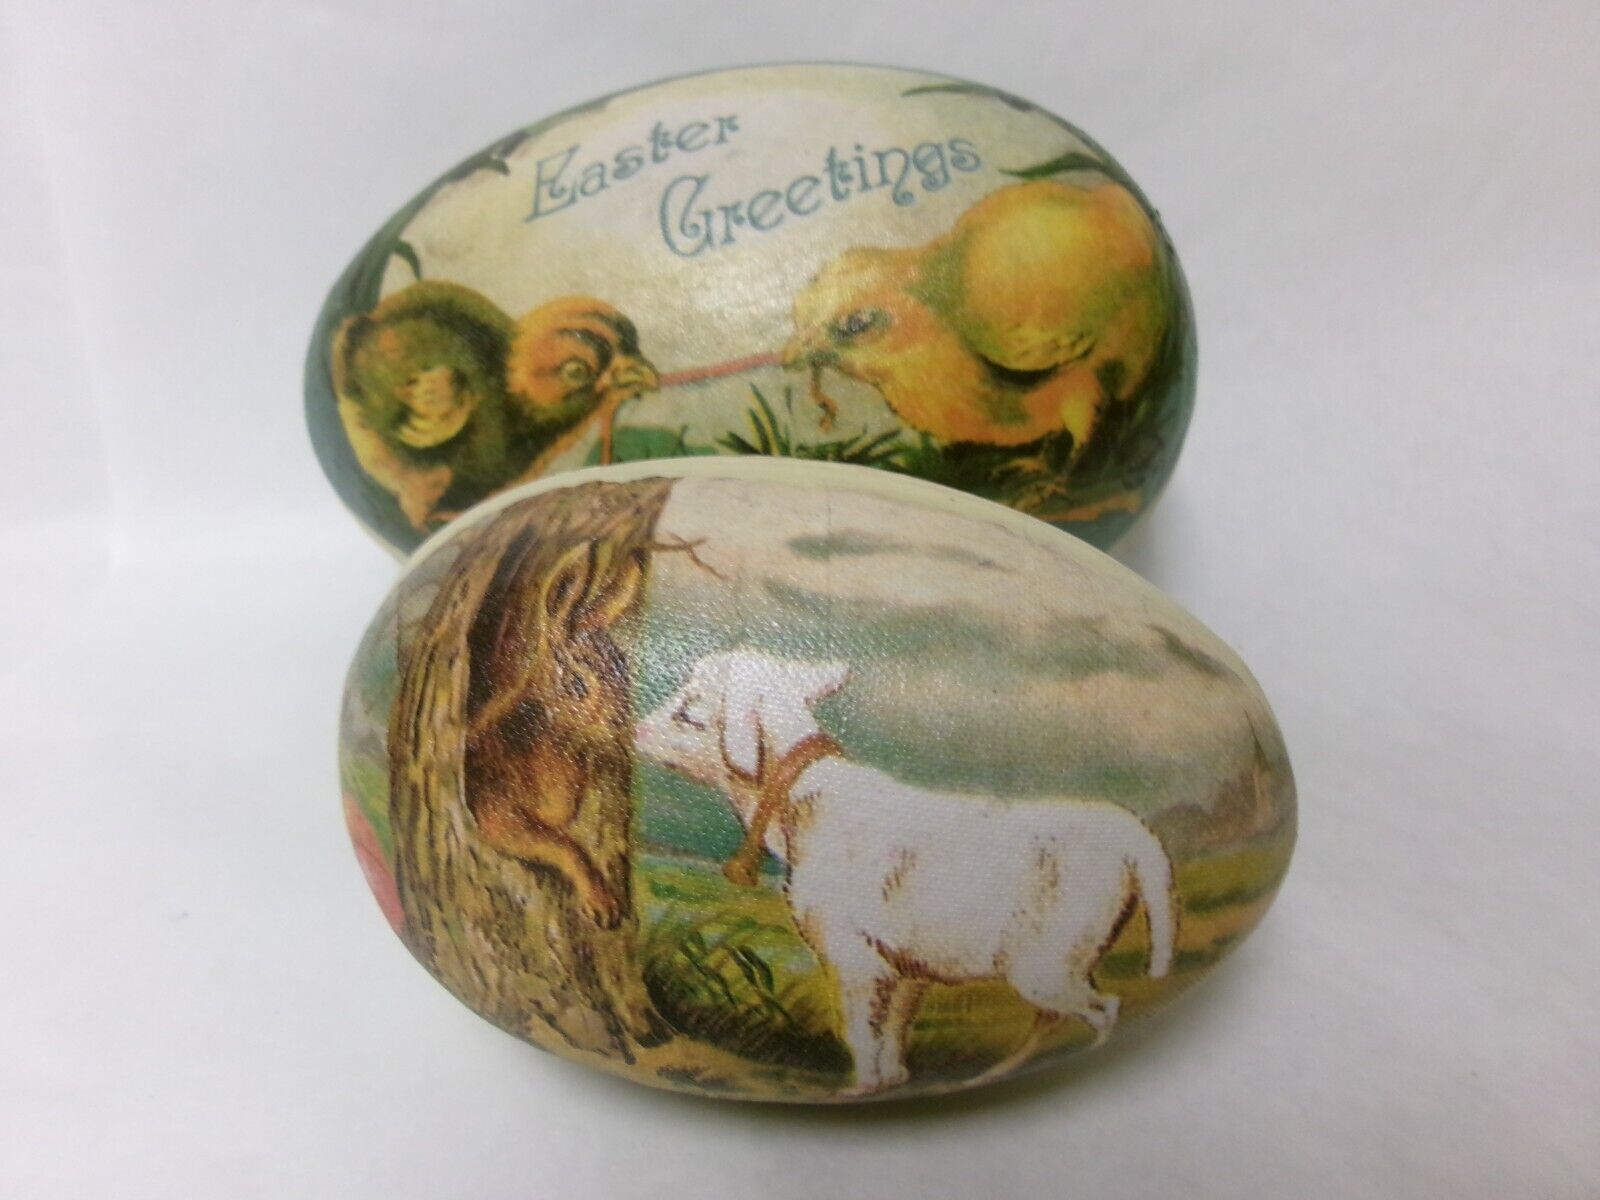 BETHANY LOWE Style Paper Mache Easter Eggs - Easter Greetings & Easter Lamb